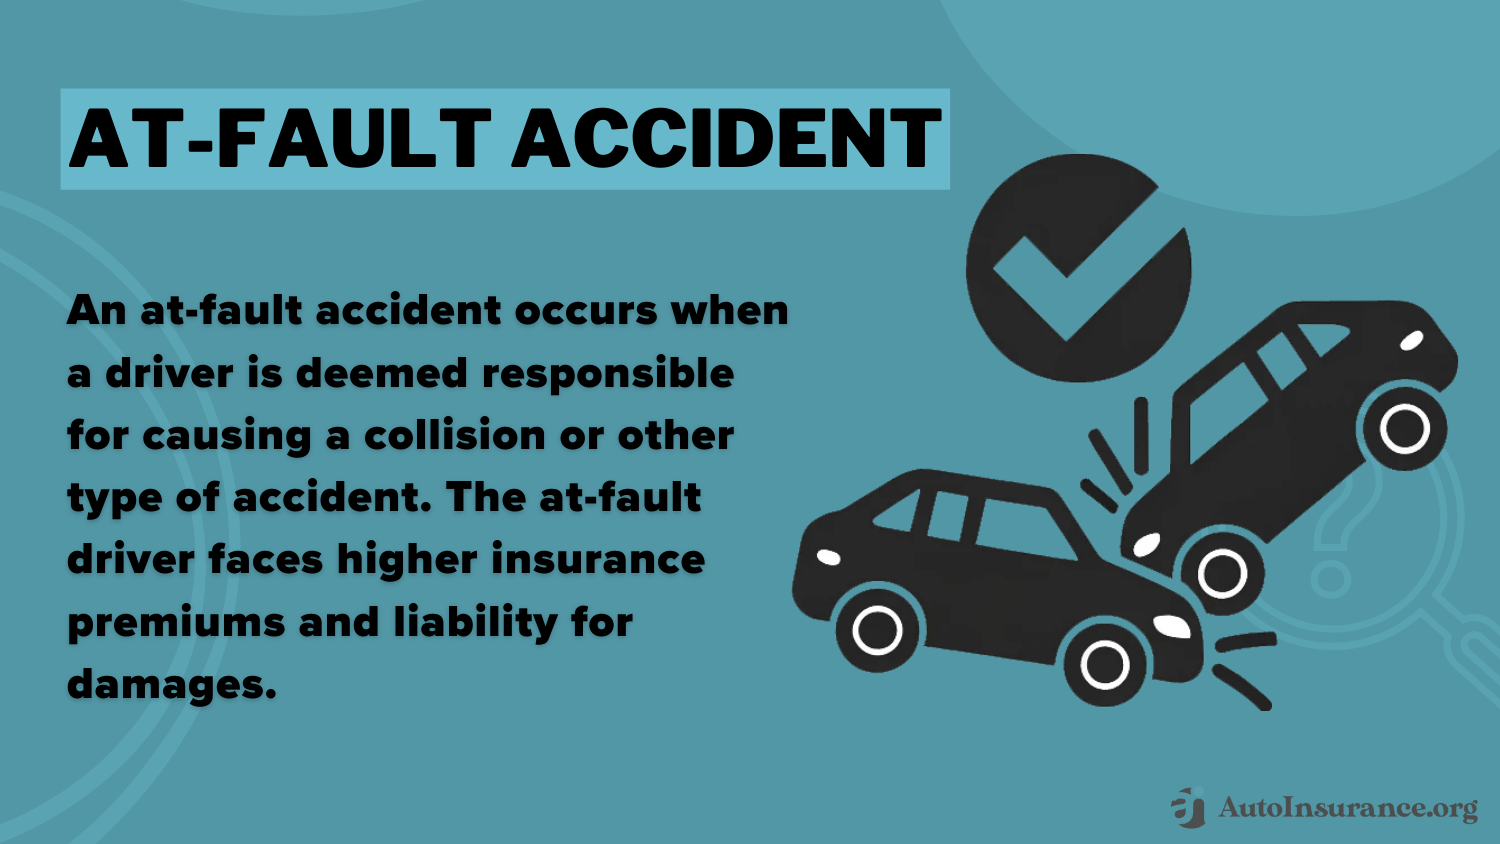 State Farm Auto Insurance Discounts: At-Fault Accident Definition Card